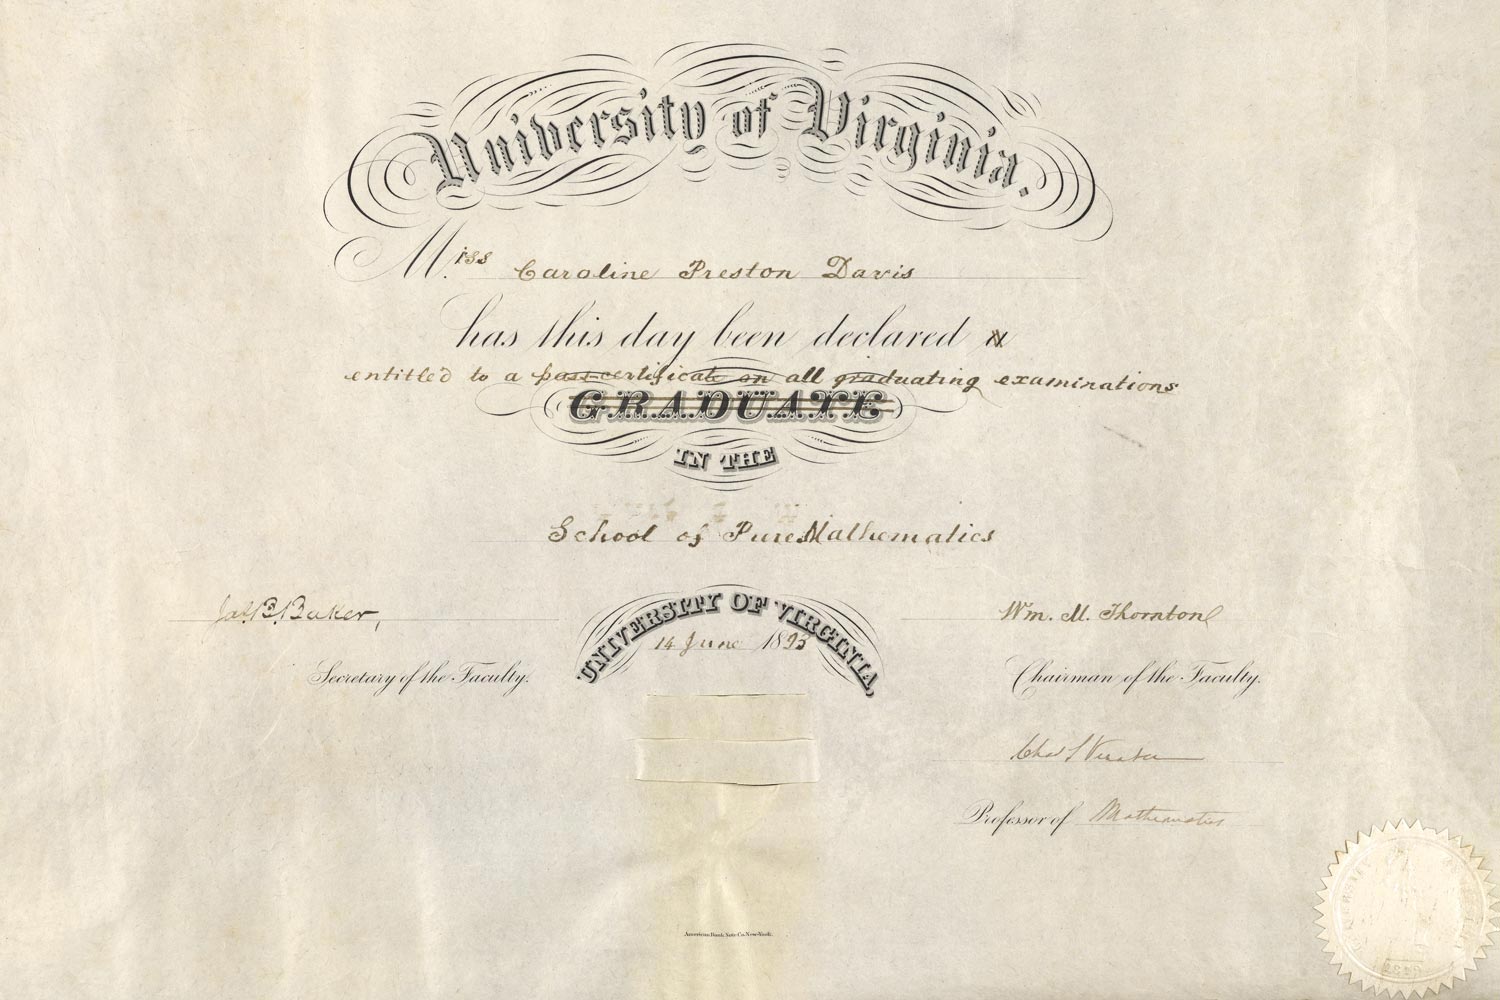 A diploma with handwritten edits